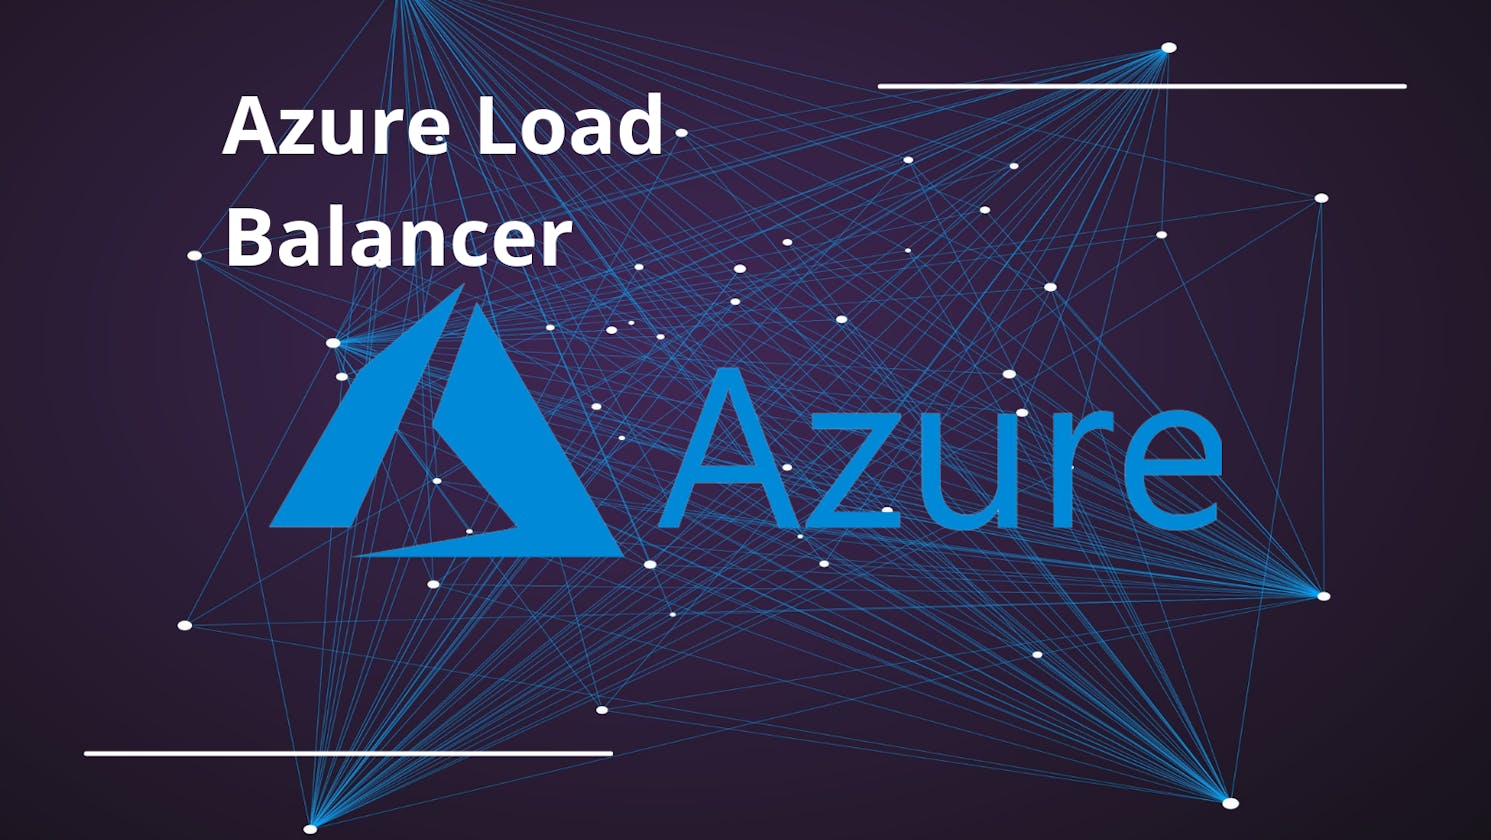 What is Azure Load Balancer?